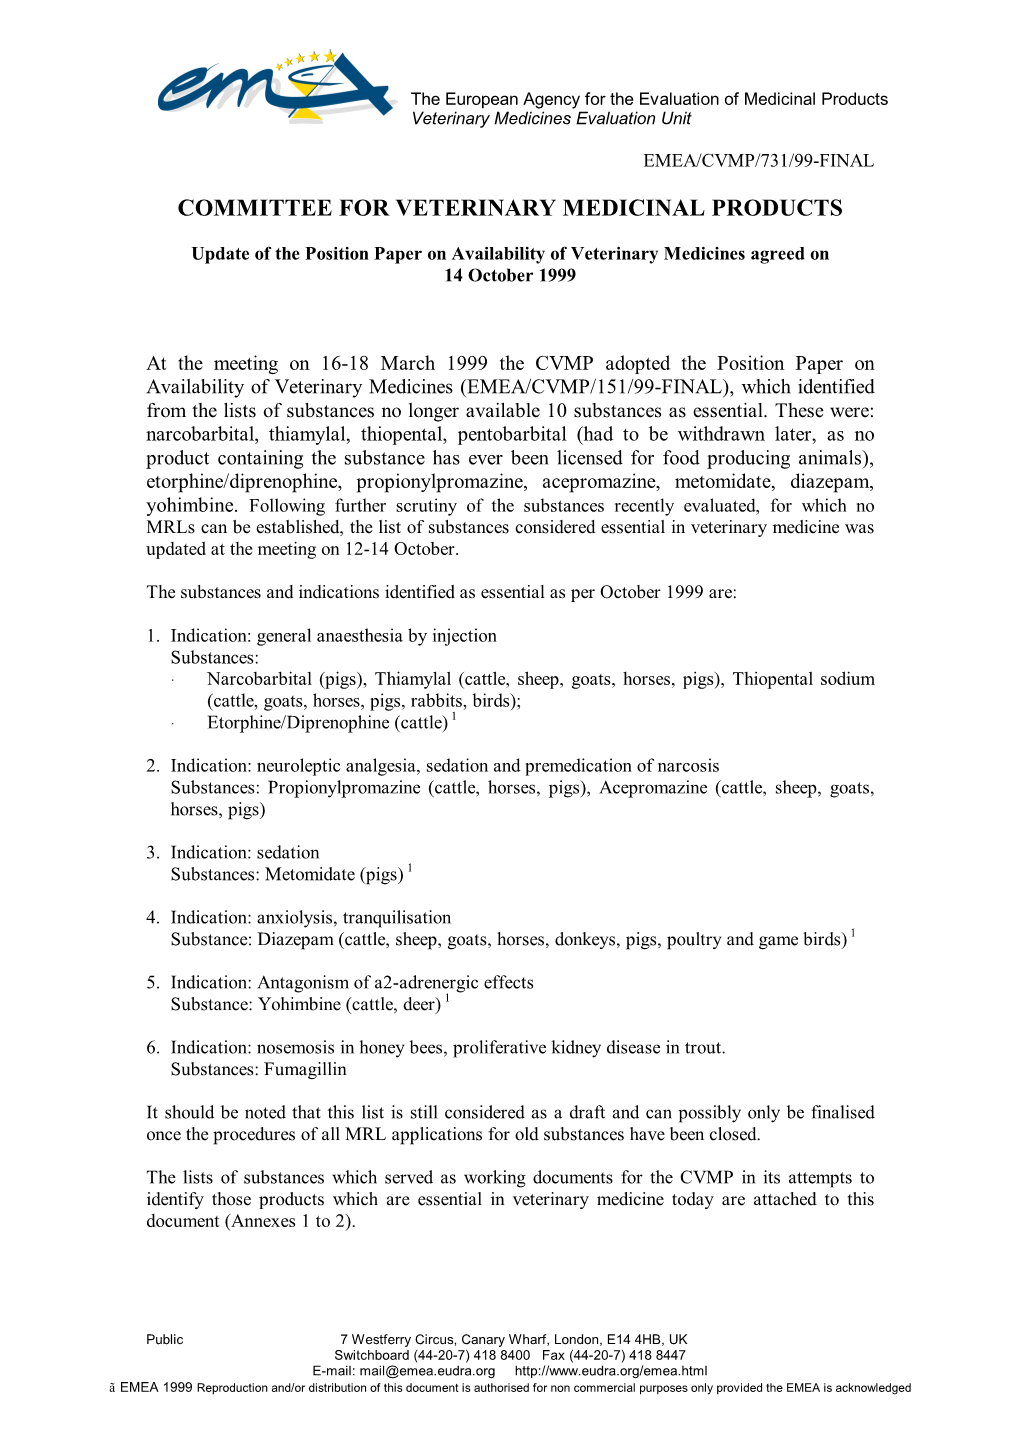 Position Paper on Availability of Veterinary Medicines Agreed on 14 October 1999